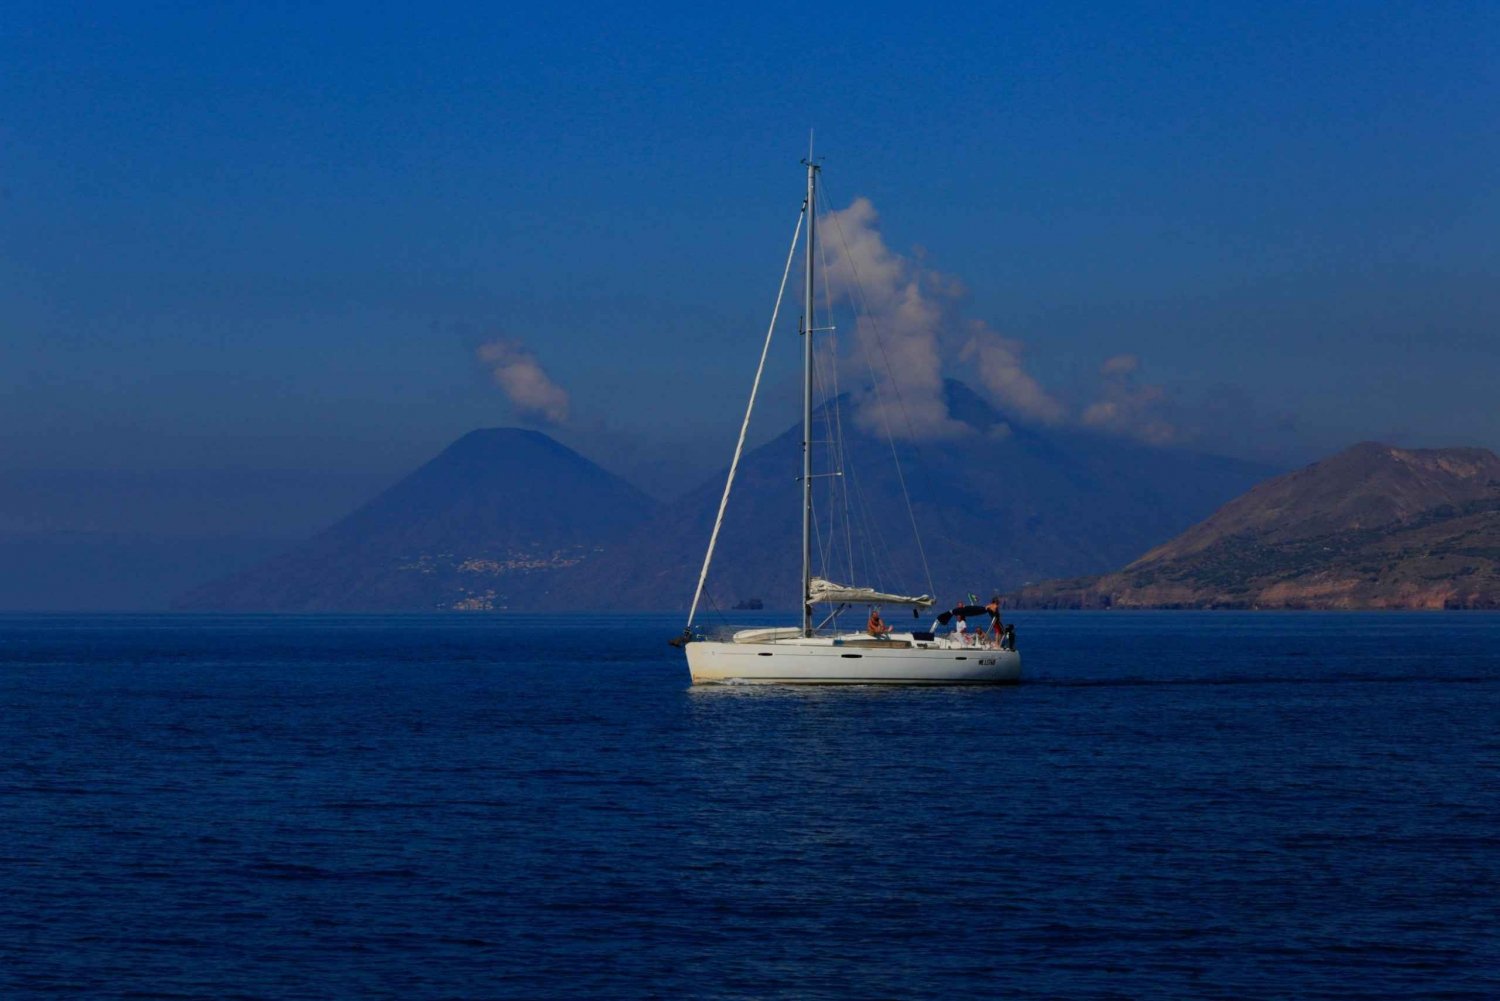 From Tropea: Aeolian Islands Day Tour by Boat